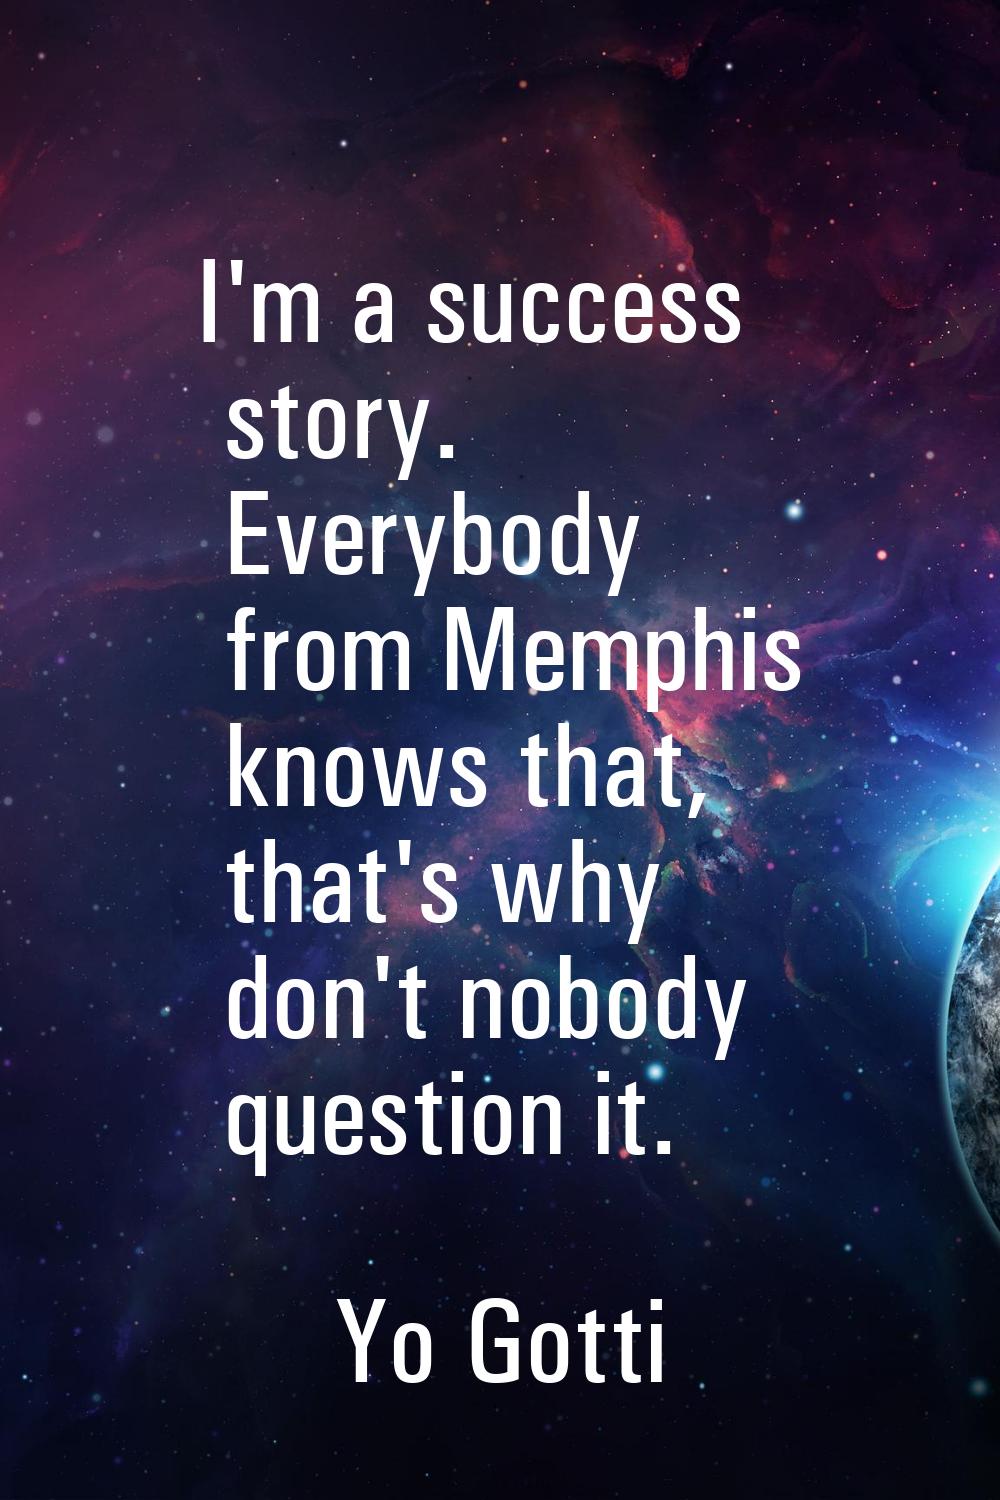 I'm a success story. Everybody from Memphis knows that, that's why don't nobody question it.